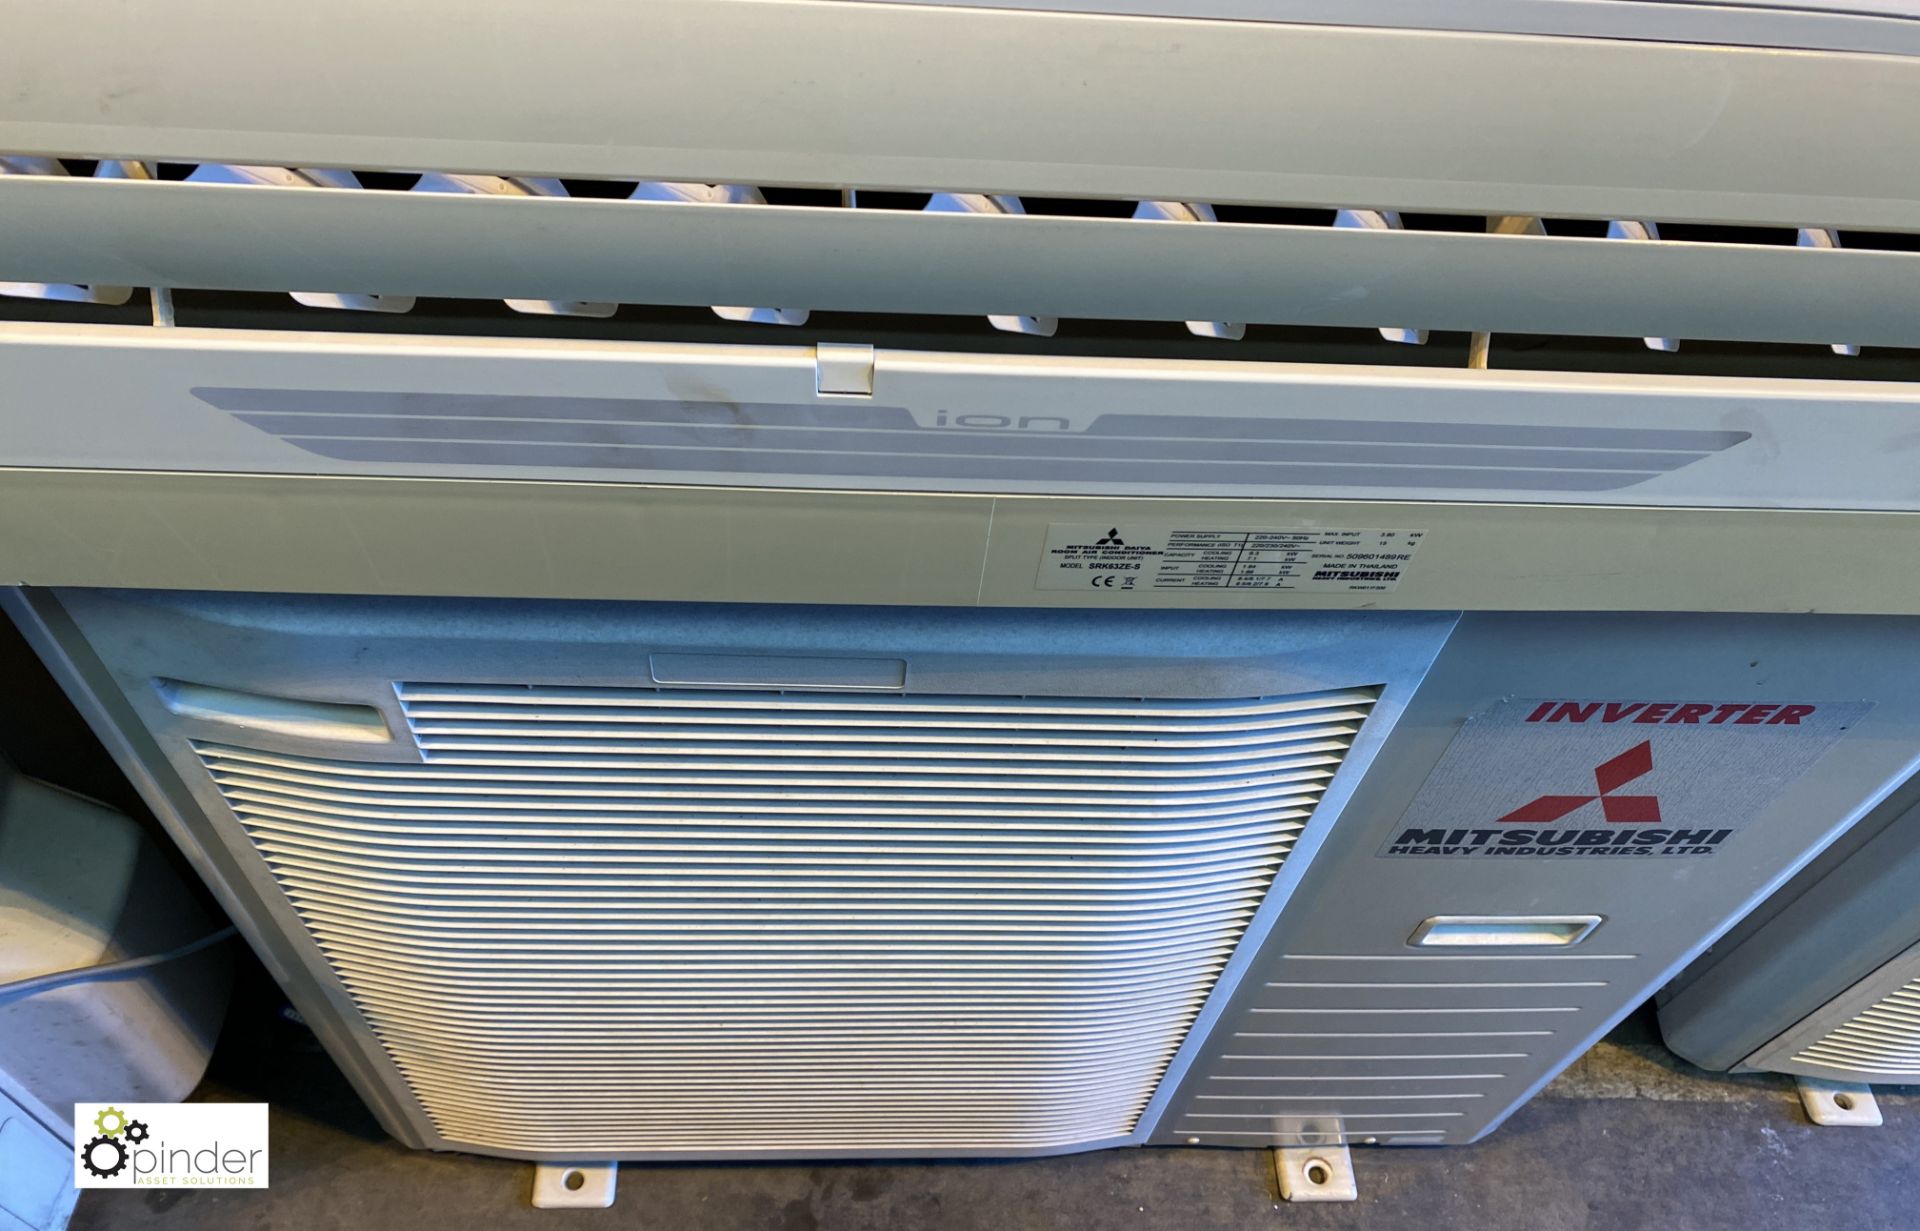 Mitsubishi SRC63ZE-S1 Air Conditioning Unit, with Mitsubishi SRK63ZE-S wall mounted inverter - Image 2 of 4